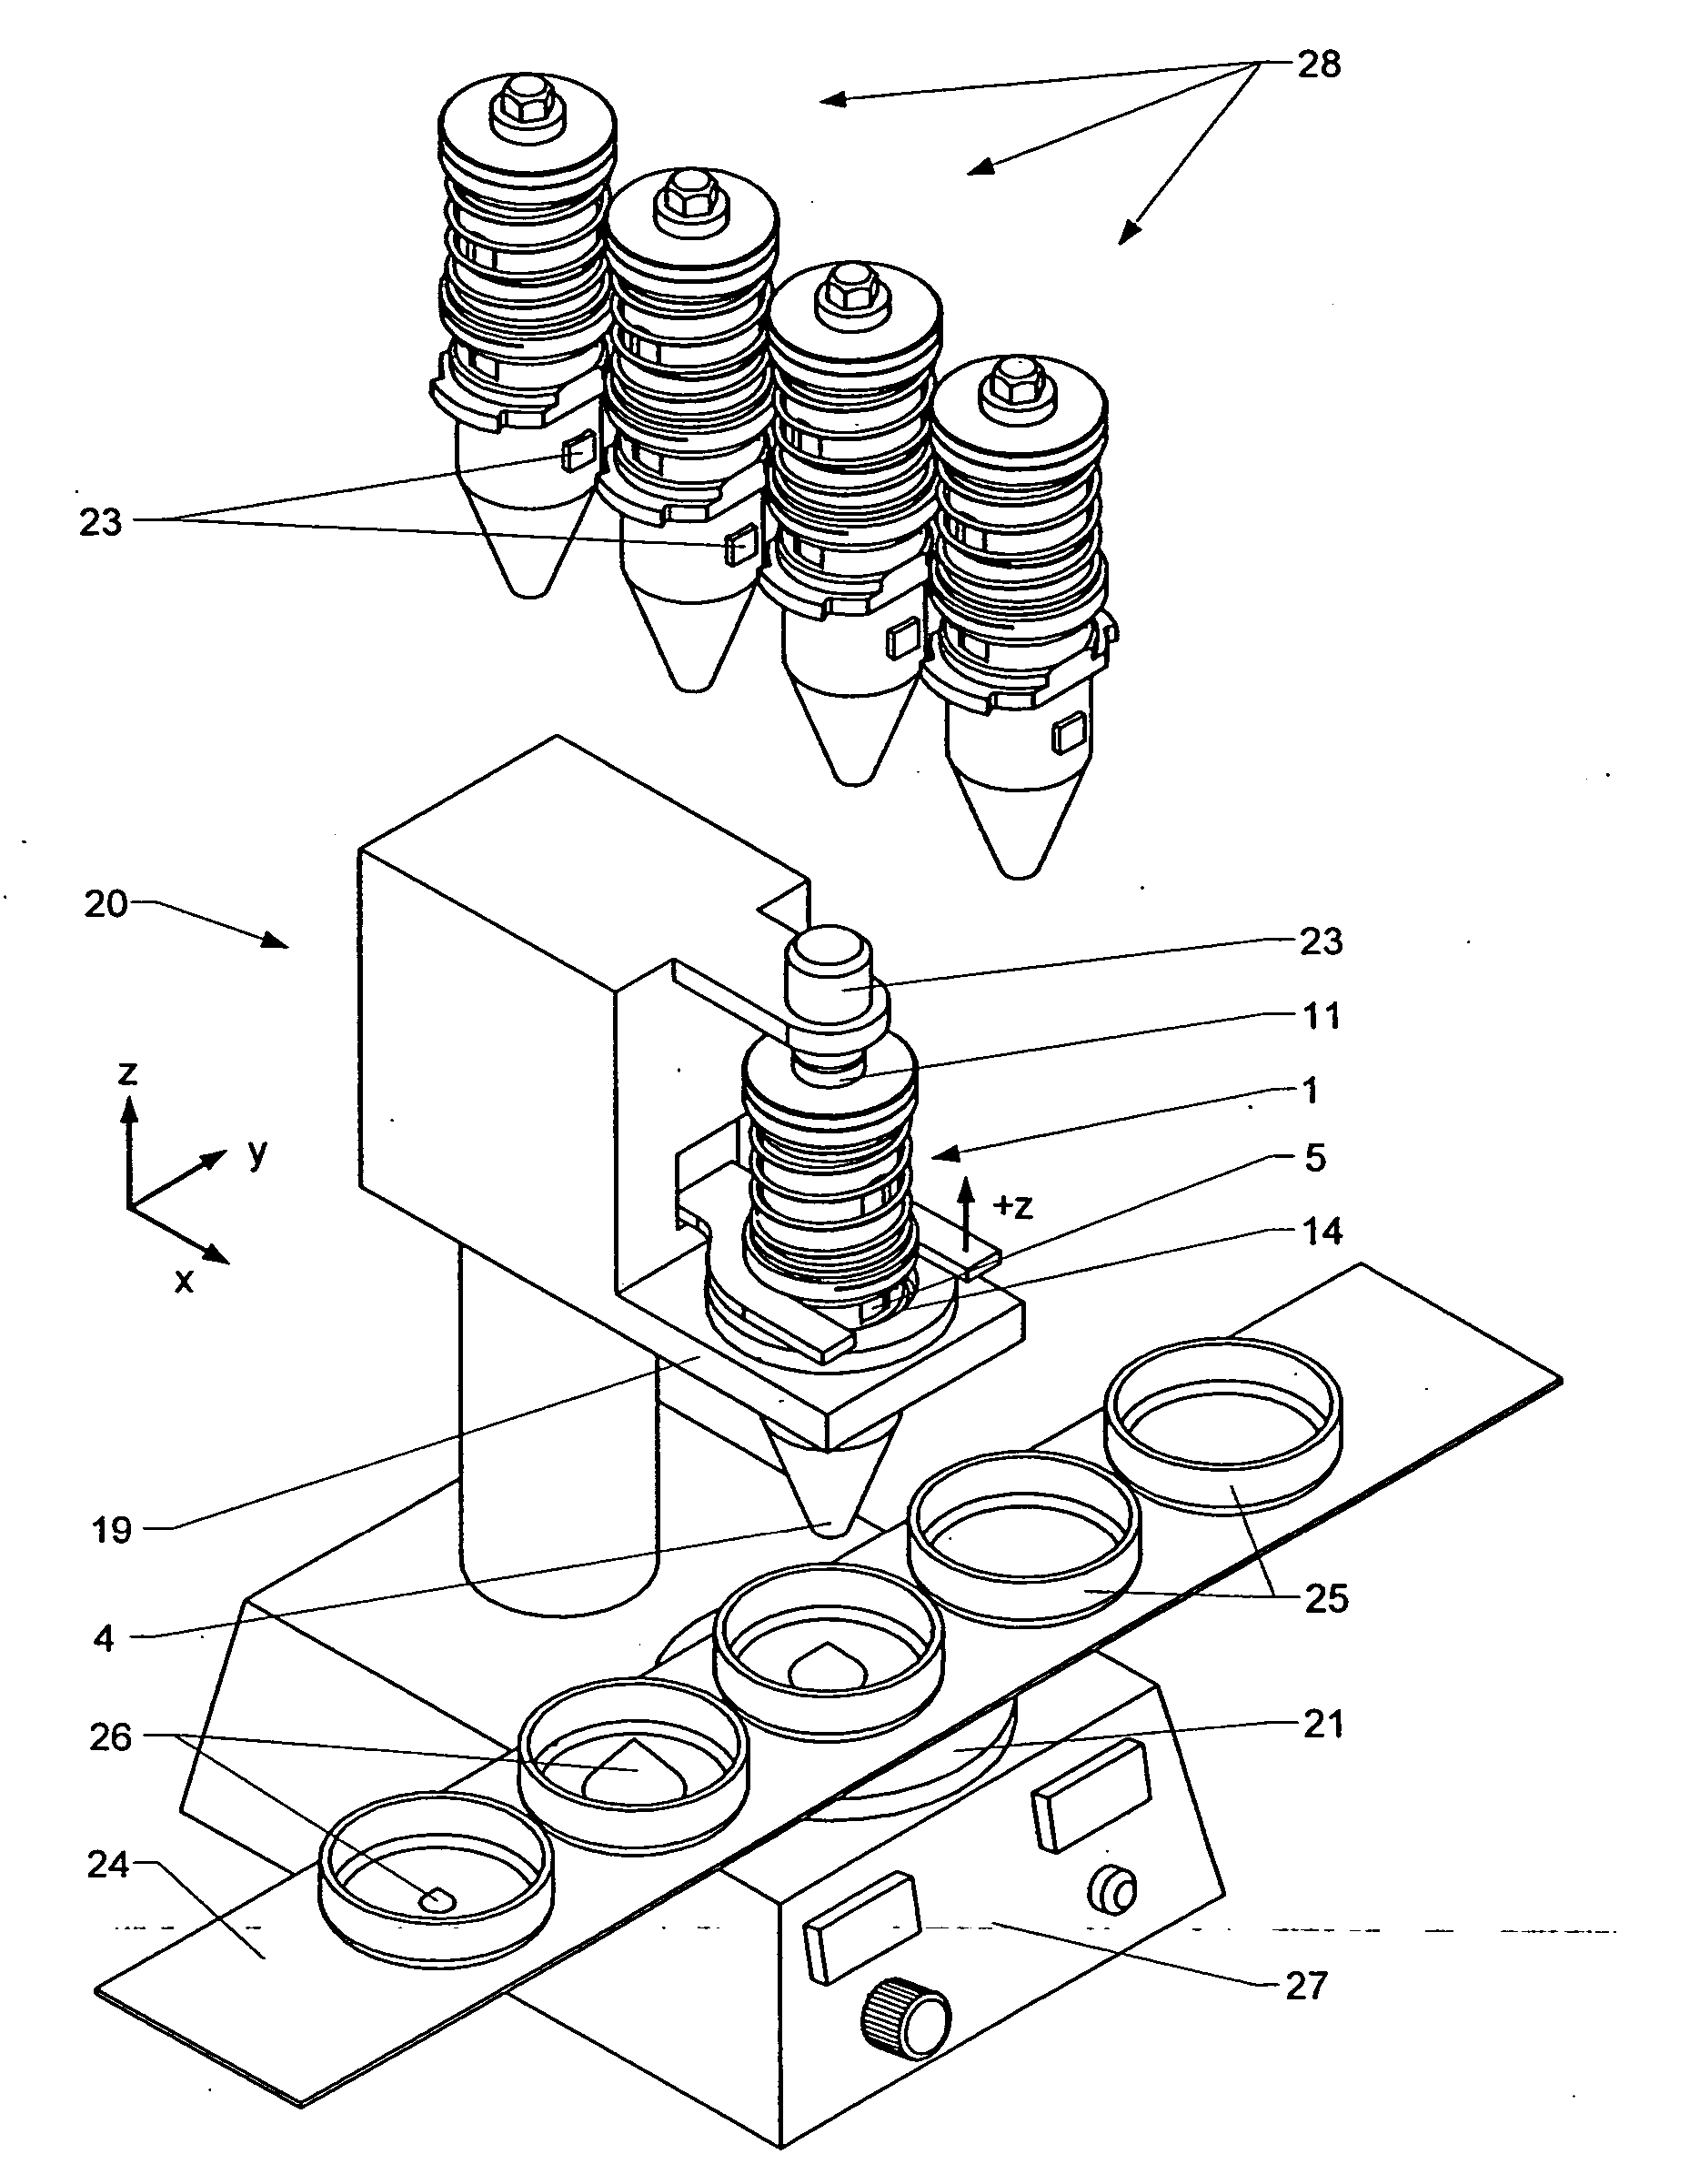 Apparatus and method for storing and dispensing material, especially in micro quantities and in combination with limited starting amounts